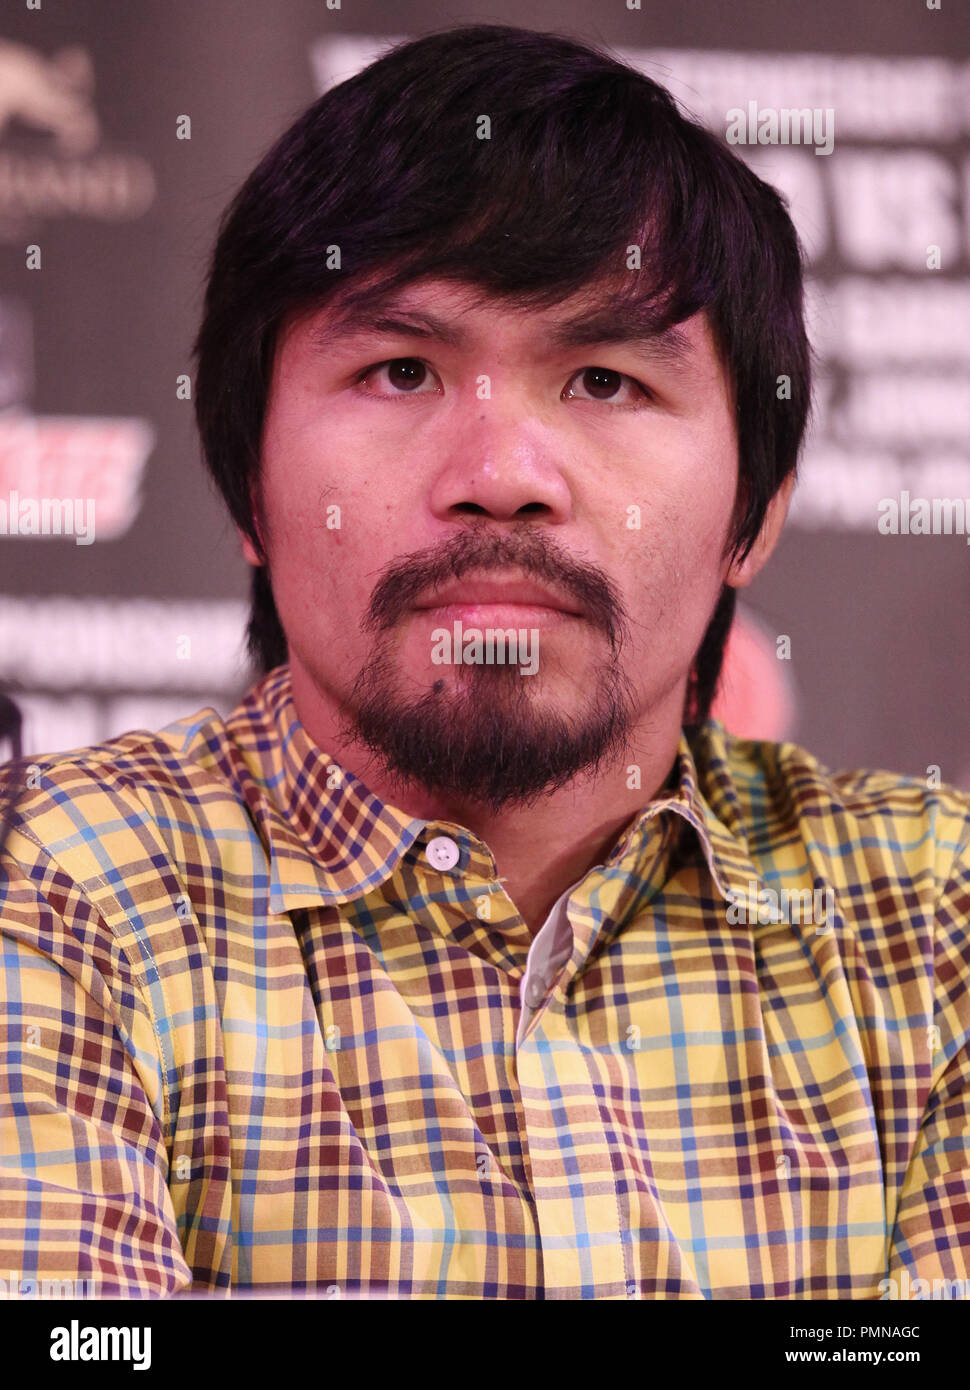 Manny Pacquiao at the MANNY PACQUIAO & TIMOTHY BRADLEY Los Angeles News Conference Luncheon announcing their world championship fight held at The Beverly Hills Hotel Crystal Ballroom in Beverly Hills, CA. The event took place on Tuesday, February 21, 2012. Photo by Eden Ari PRPP/ PictureLux Stock Photo